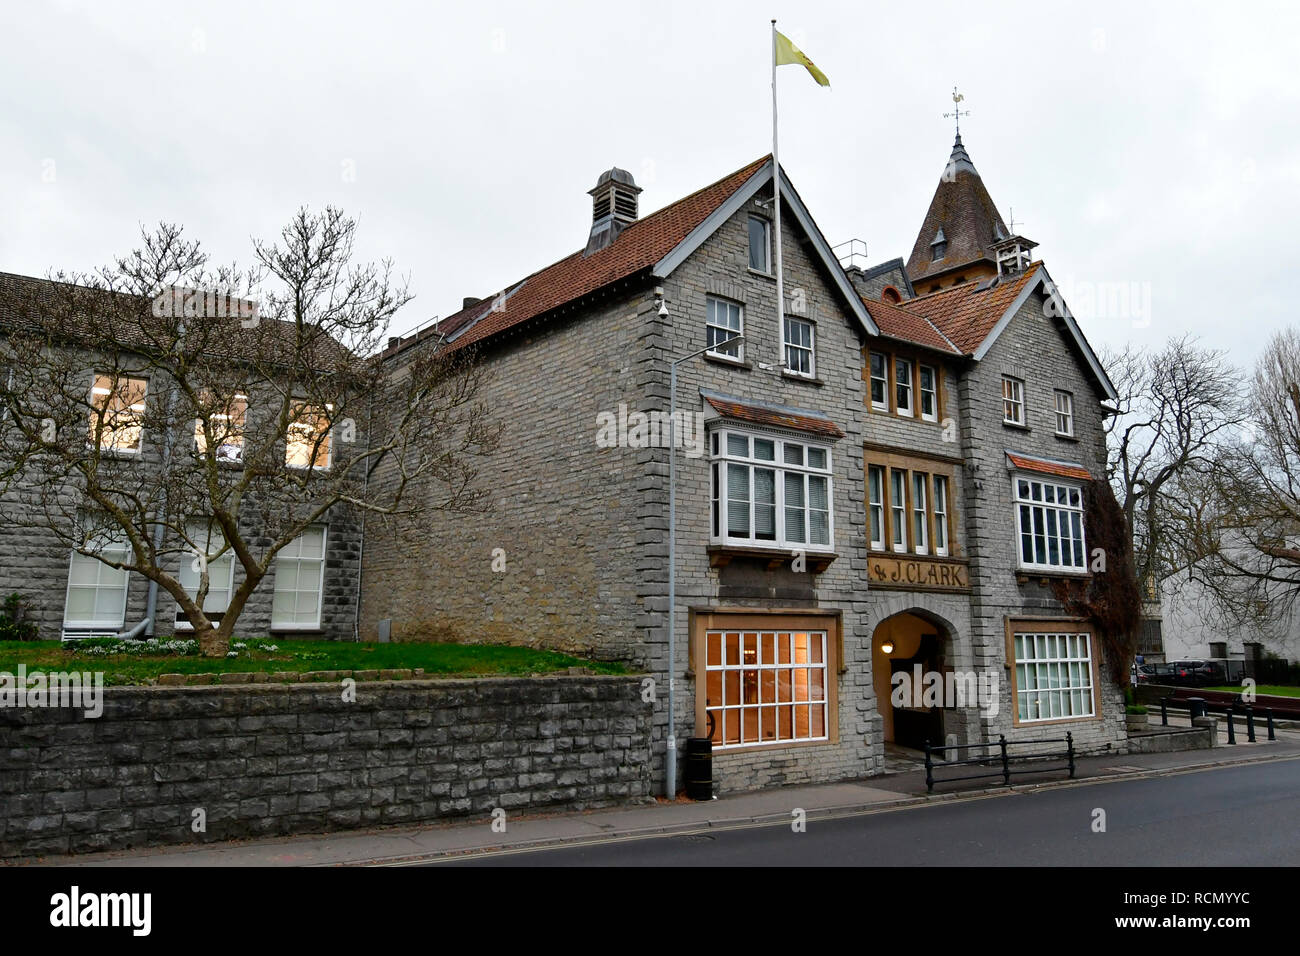 Street, Somerset, UK. 15th January, 2019. C&J Clark's Shoes Head office in  Street in Somerset. Parts of its company due to close. Credit: Robert  Timoney/Alamy Live News Stock Photo - Alamy